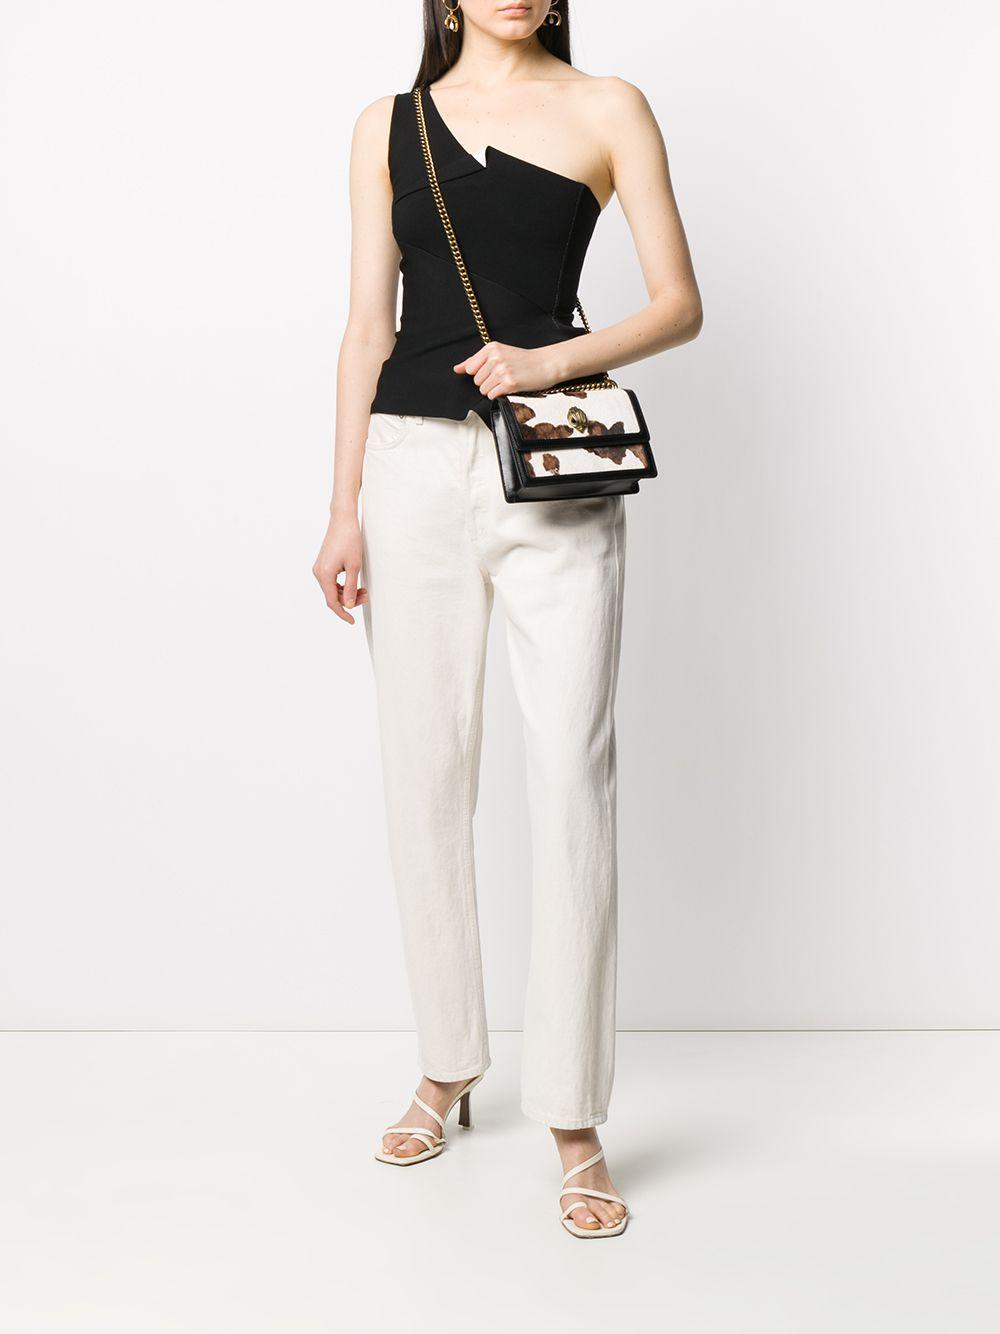 Kurt Geiger Leather Cow Print Shoulder Bag in White - Save 25% - Lyst